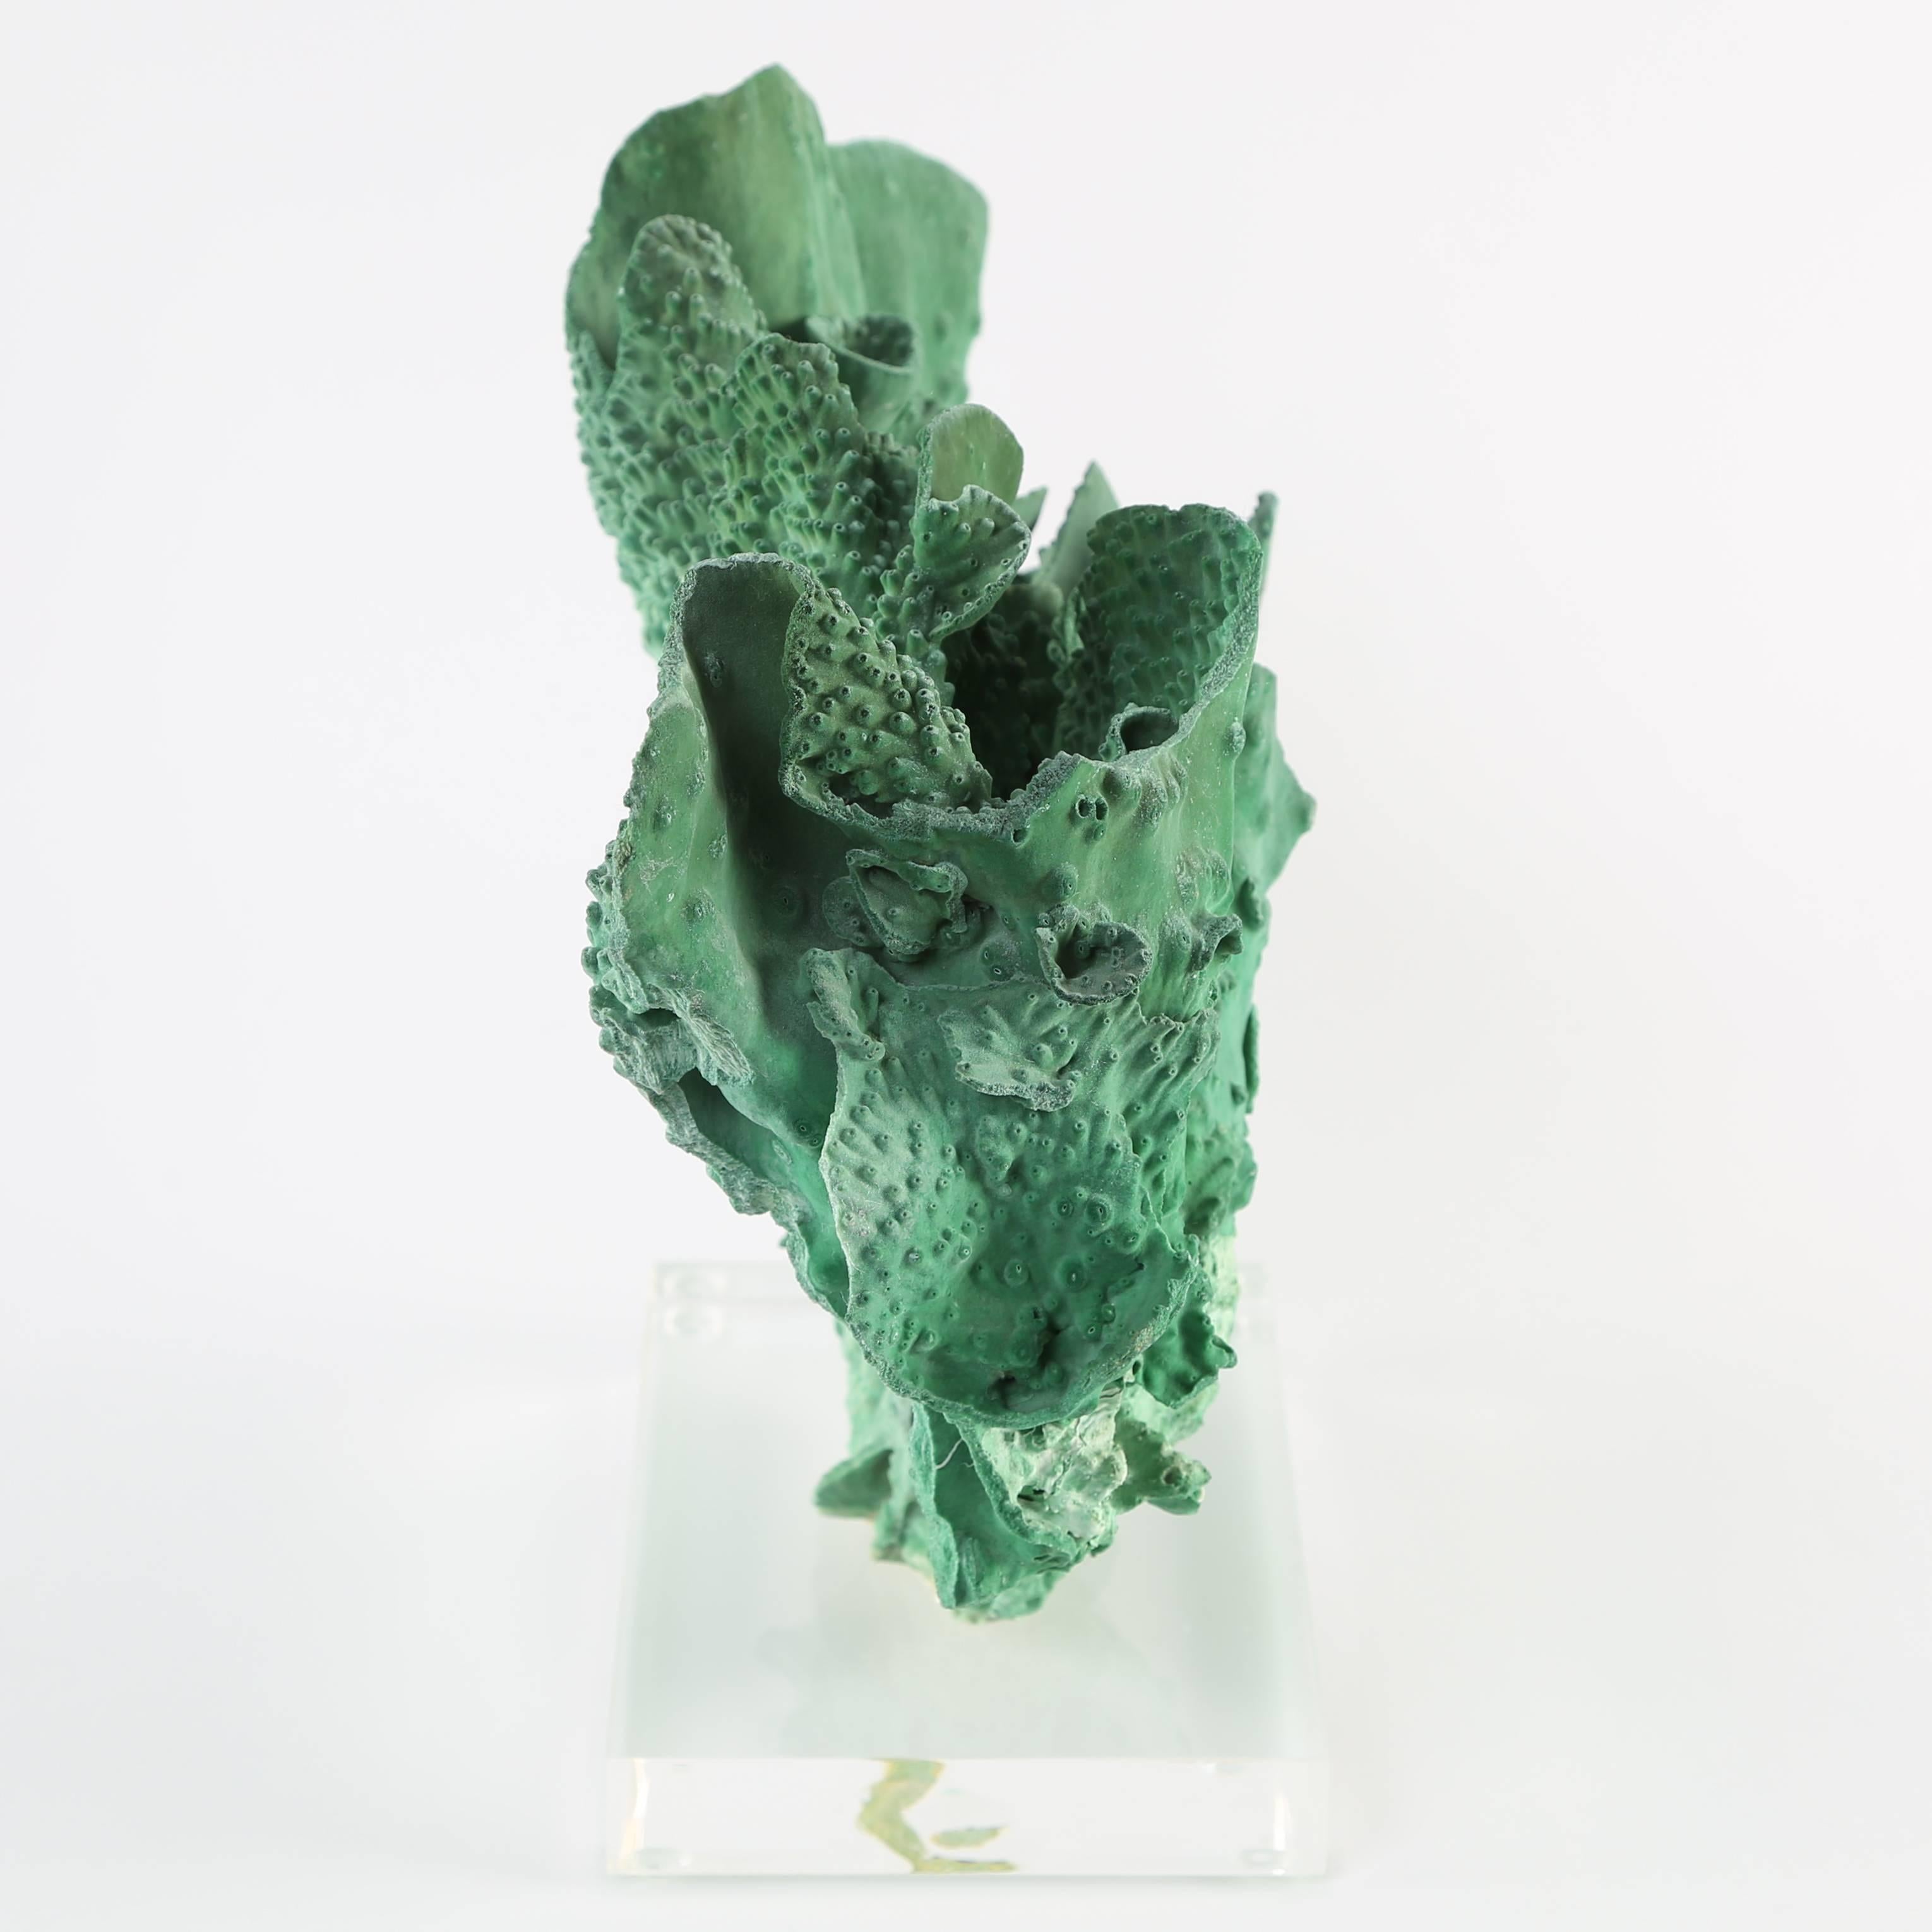 American Vintage Green Coral Specimen Mounted on Lucite Stand